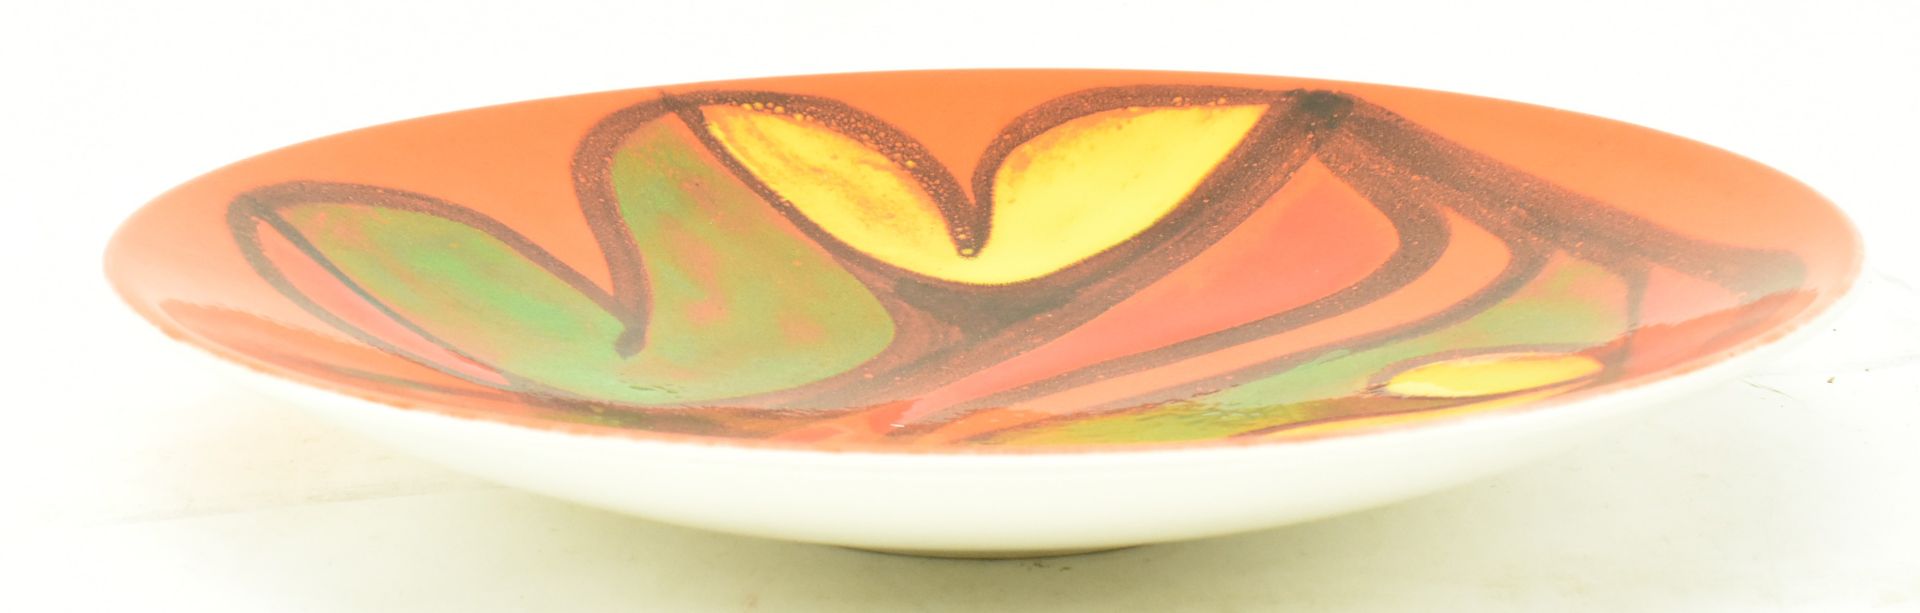 POOLE POTTERY - DELPHIS - STUDIO ART CHARGER PLATE - Image 5 of 5